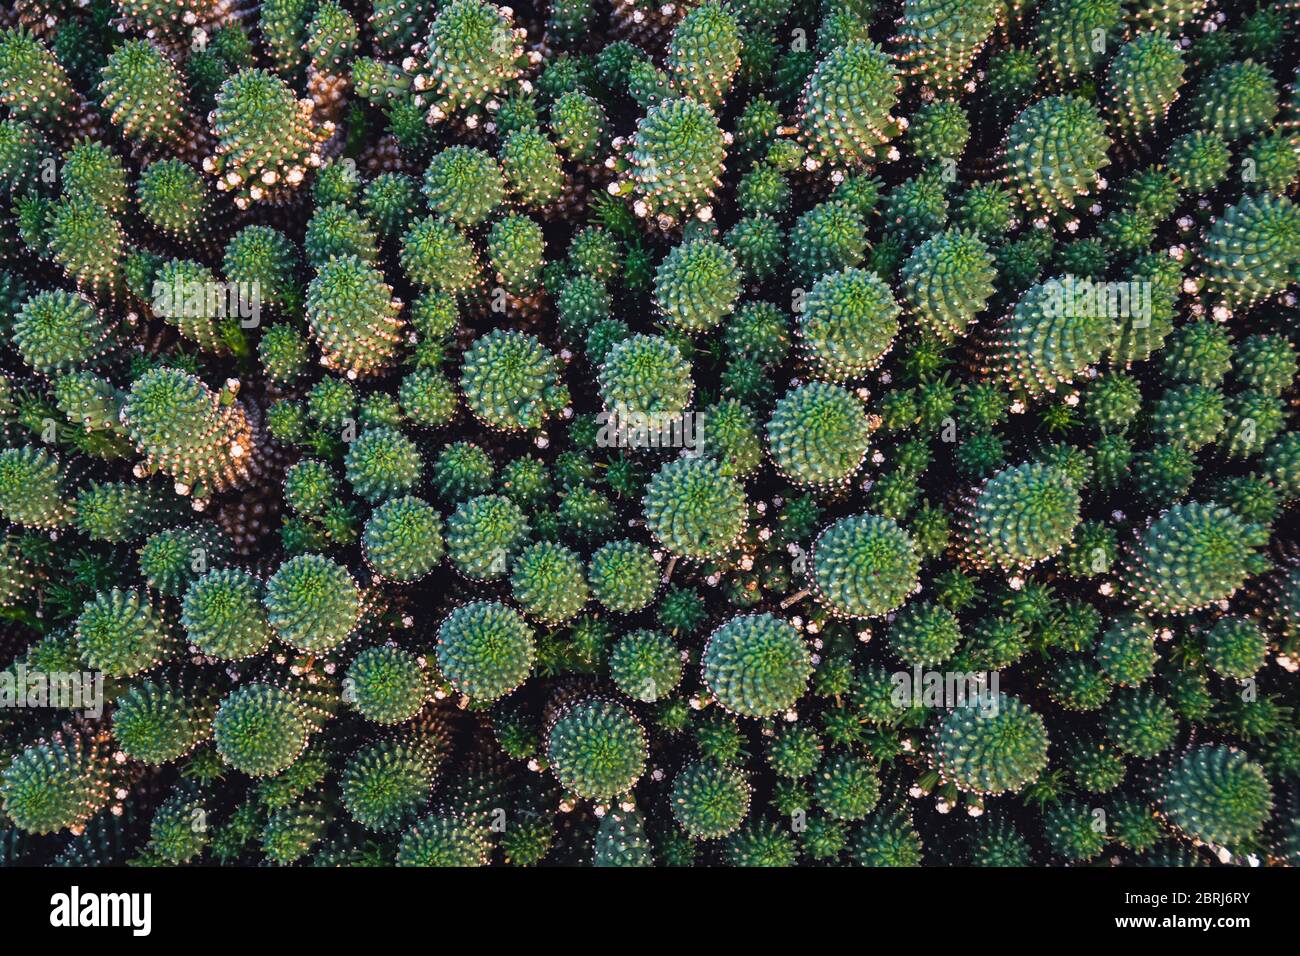 Top-down view of a clump of mammillaria cactus forming interesting fractal patterns. Abstract detailed natural cacti background. Stock Photo